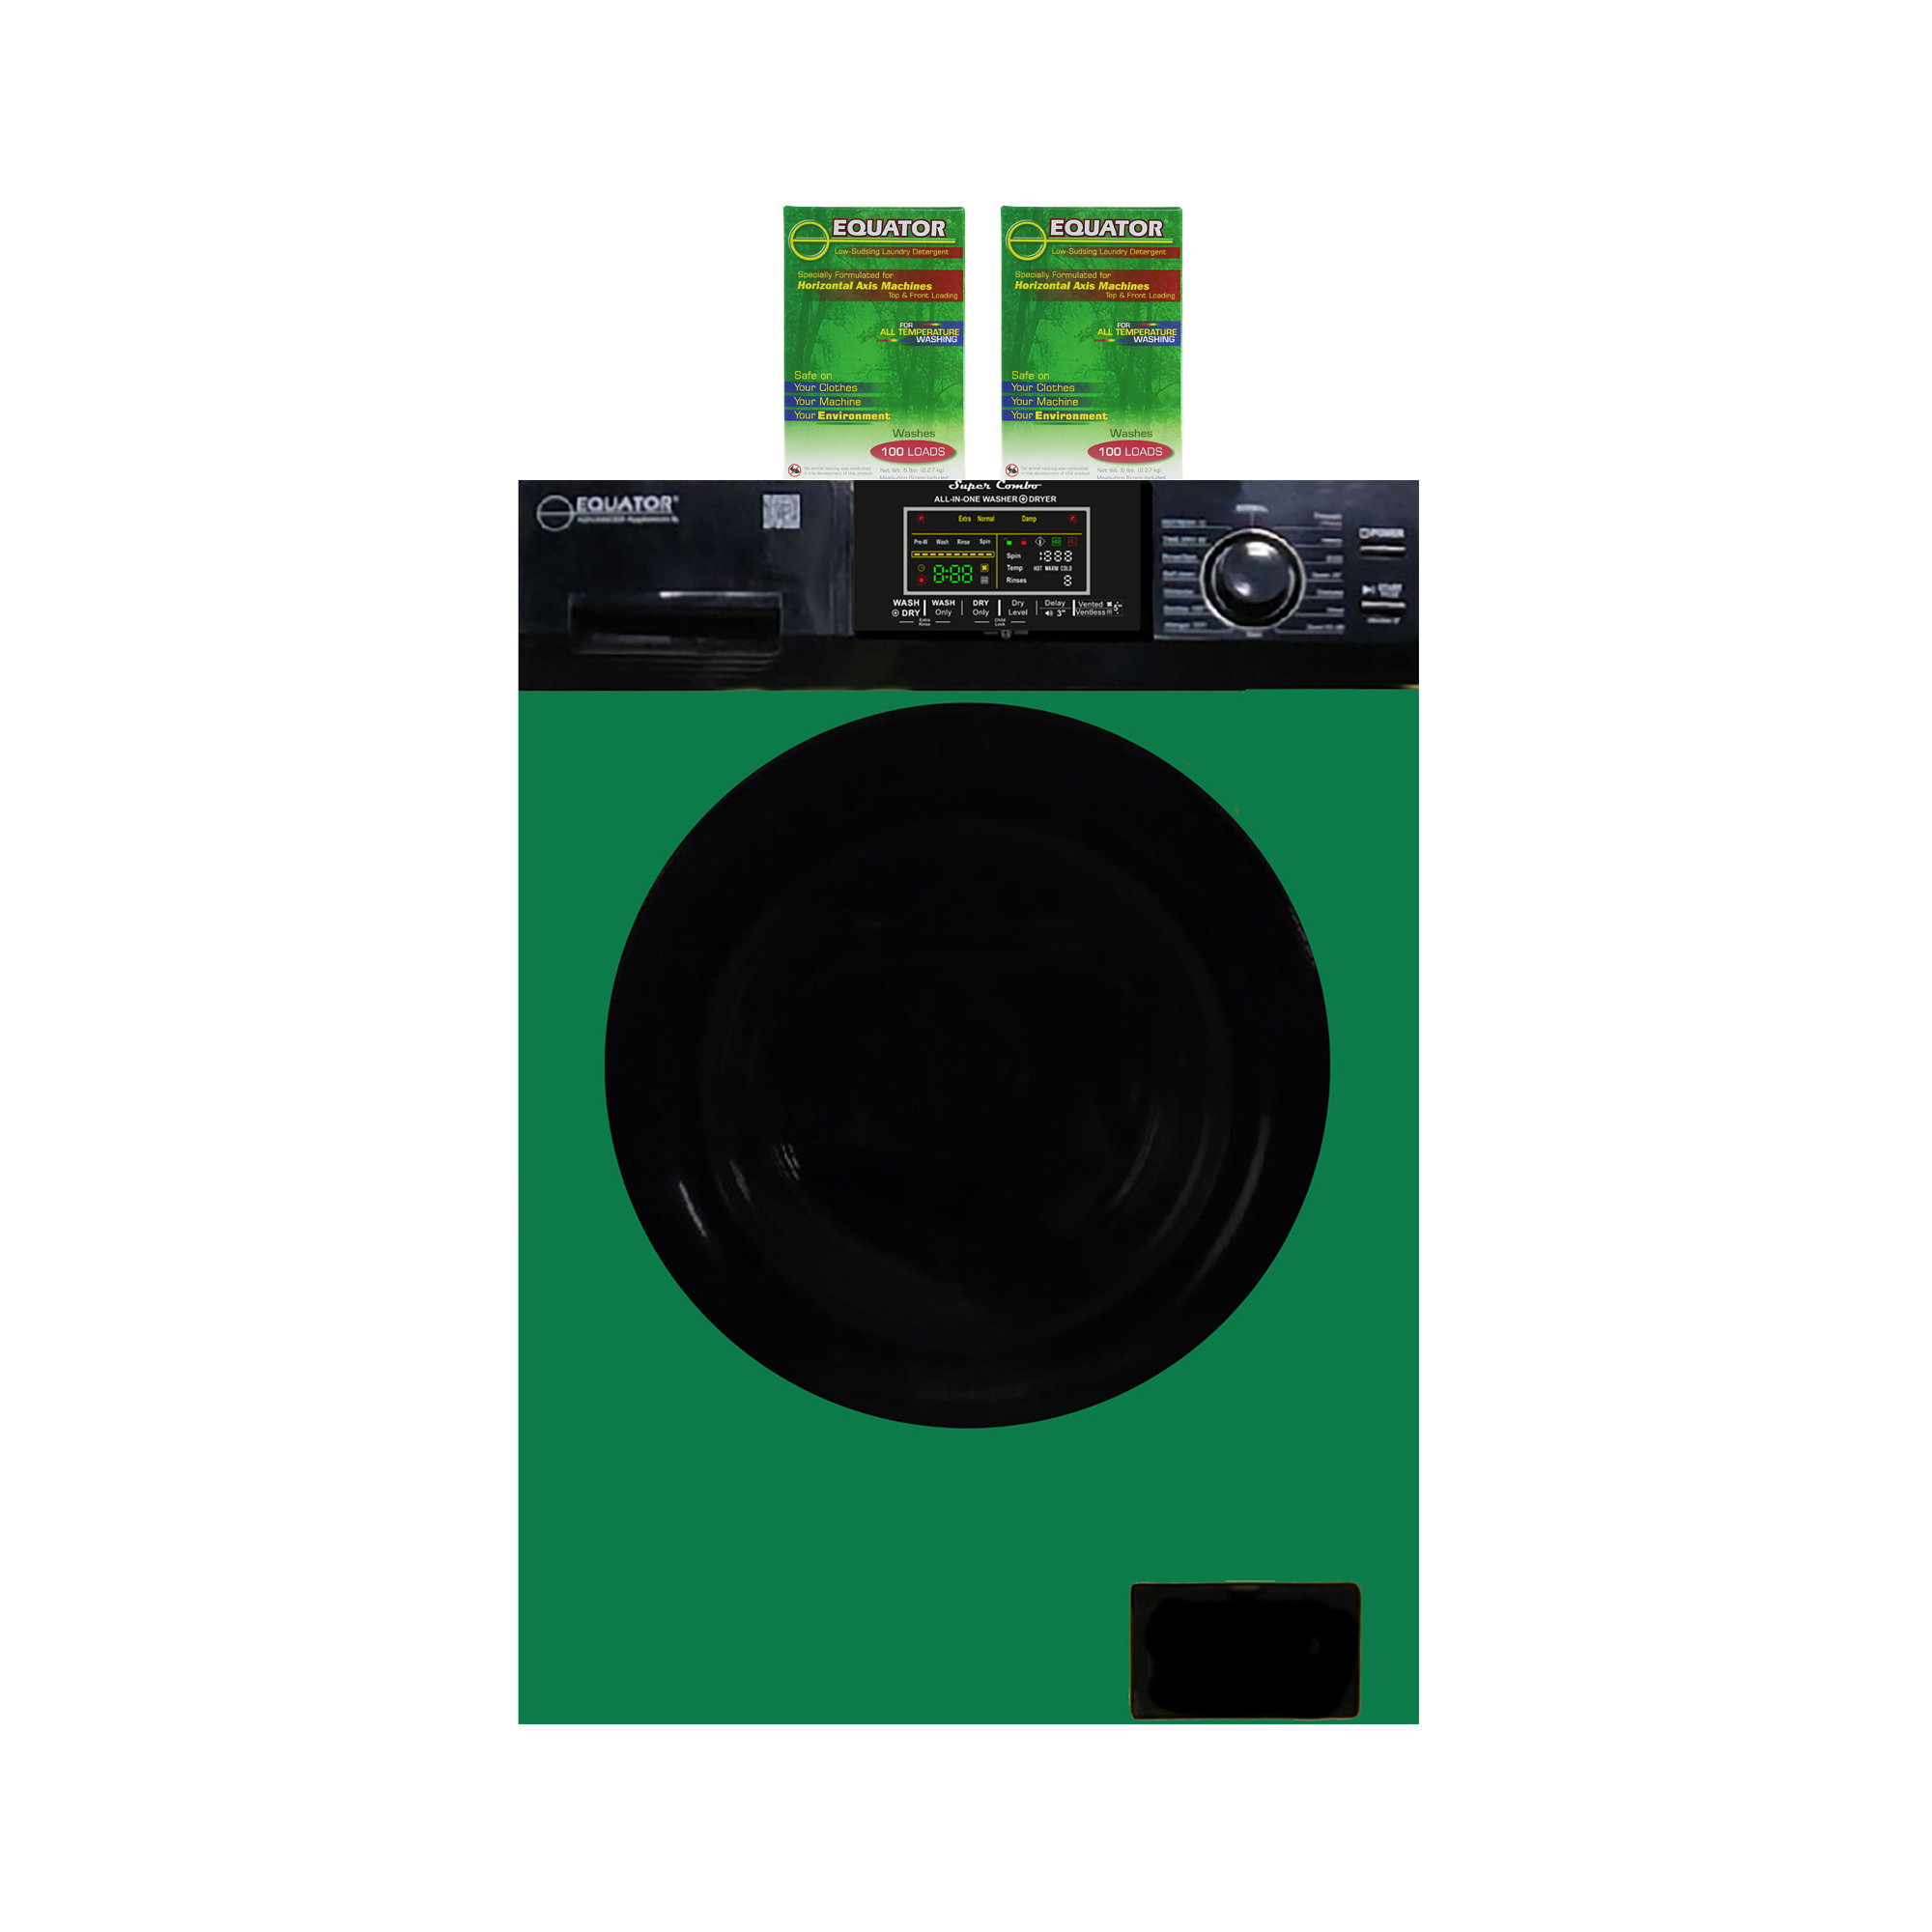 Equator Advanced Appliances EZ5500CVGreen/Black2BoxesofHED 18lb. Combination Washer Dryer with 2 Boxes of HE Detergent – Green 